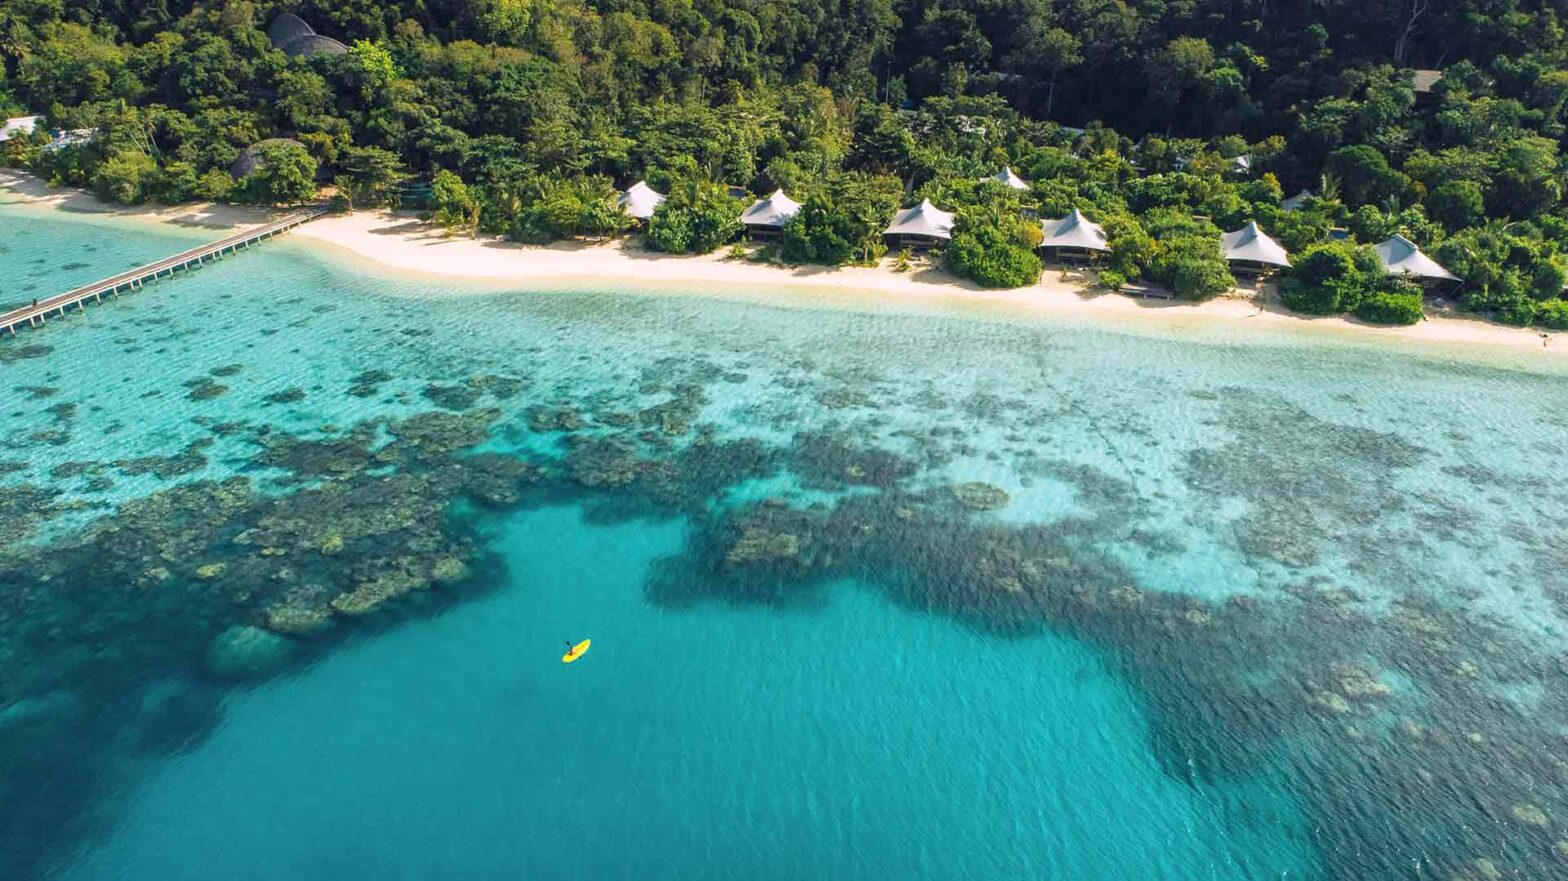 Bawah Reserve, private island, beach resort and hotel, Indonesia. Kayaking in the lagoon. Tented beach suites line the shore.